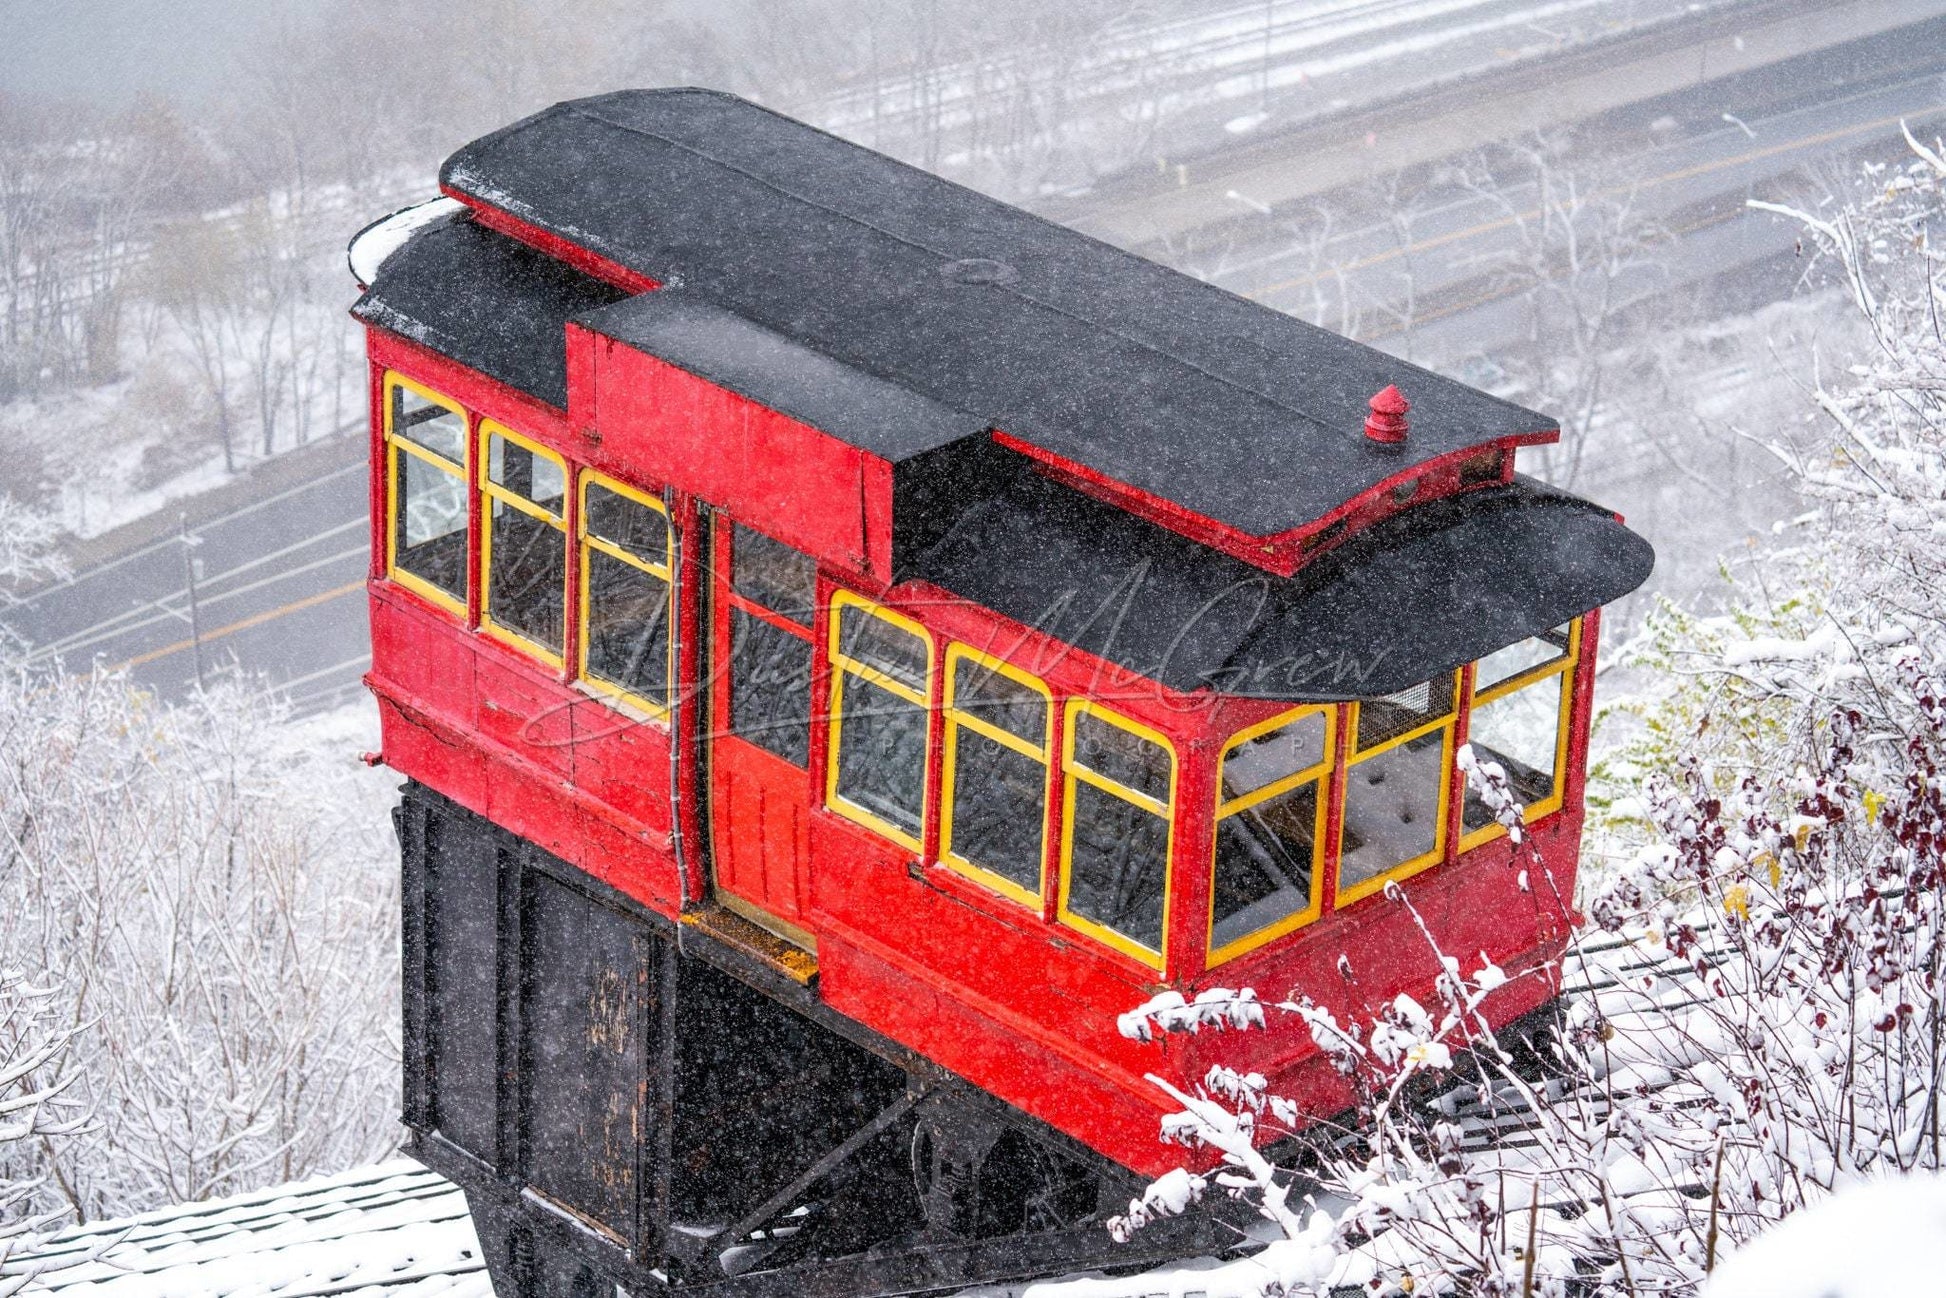 Pittsburgh Incline Photo - Snowy Art Duquesne